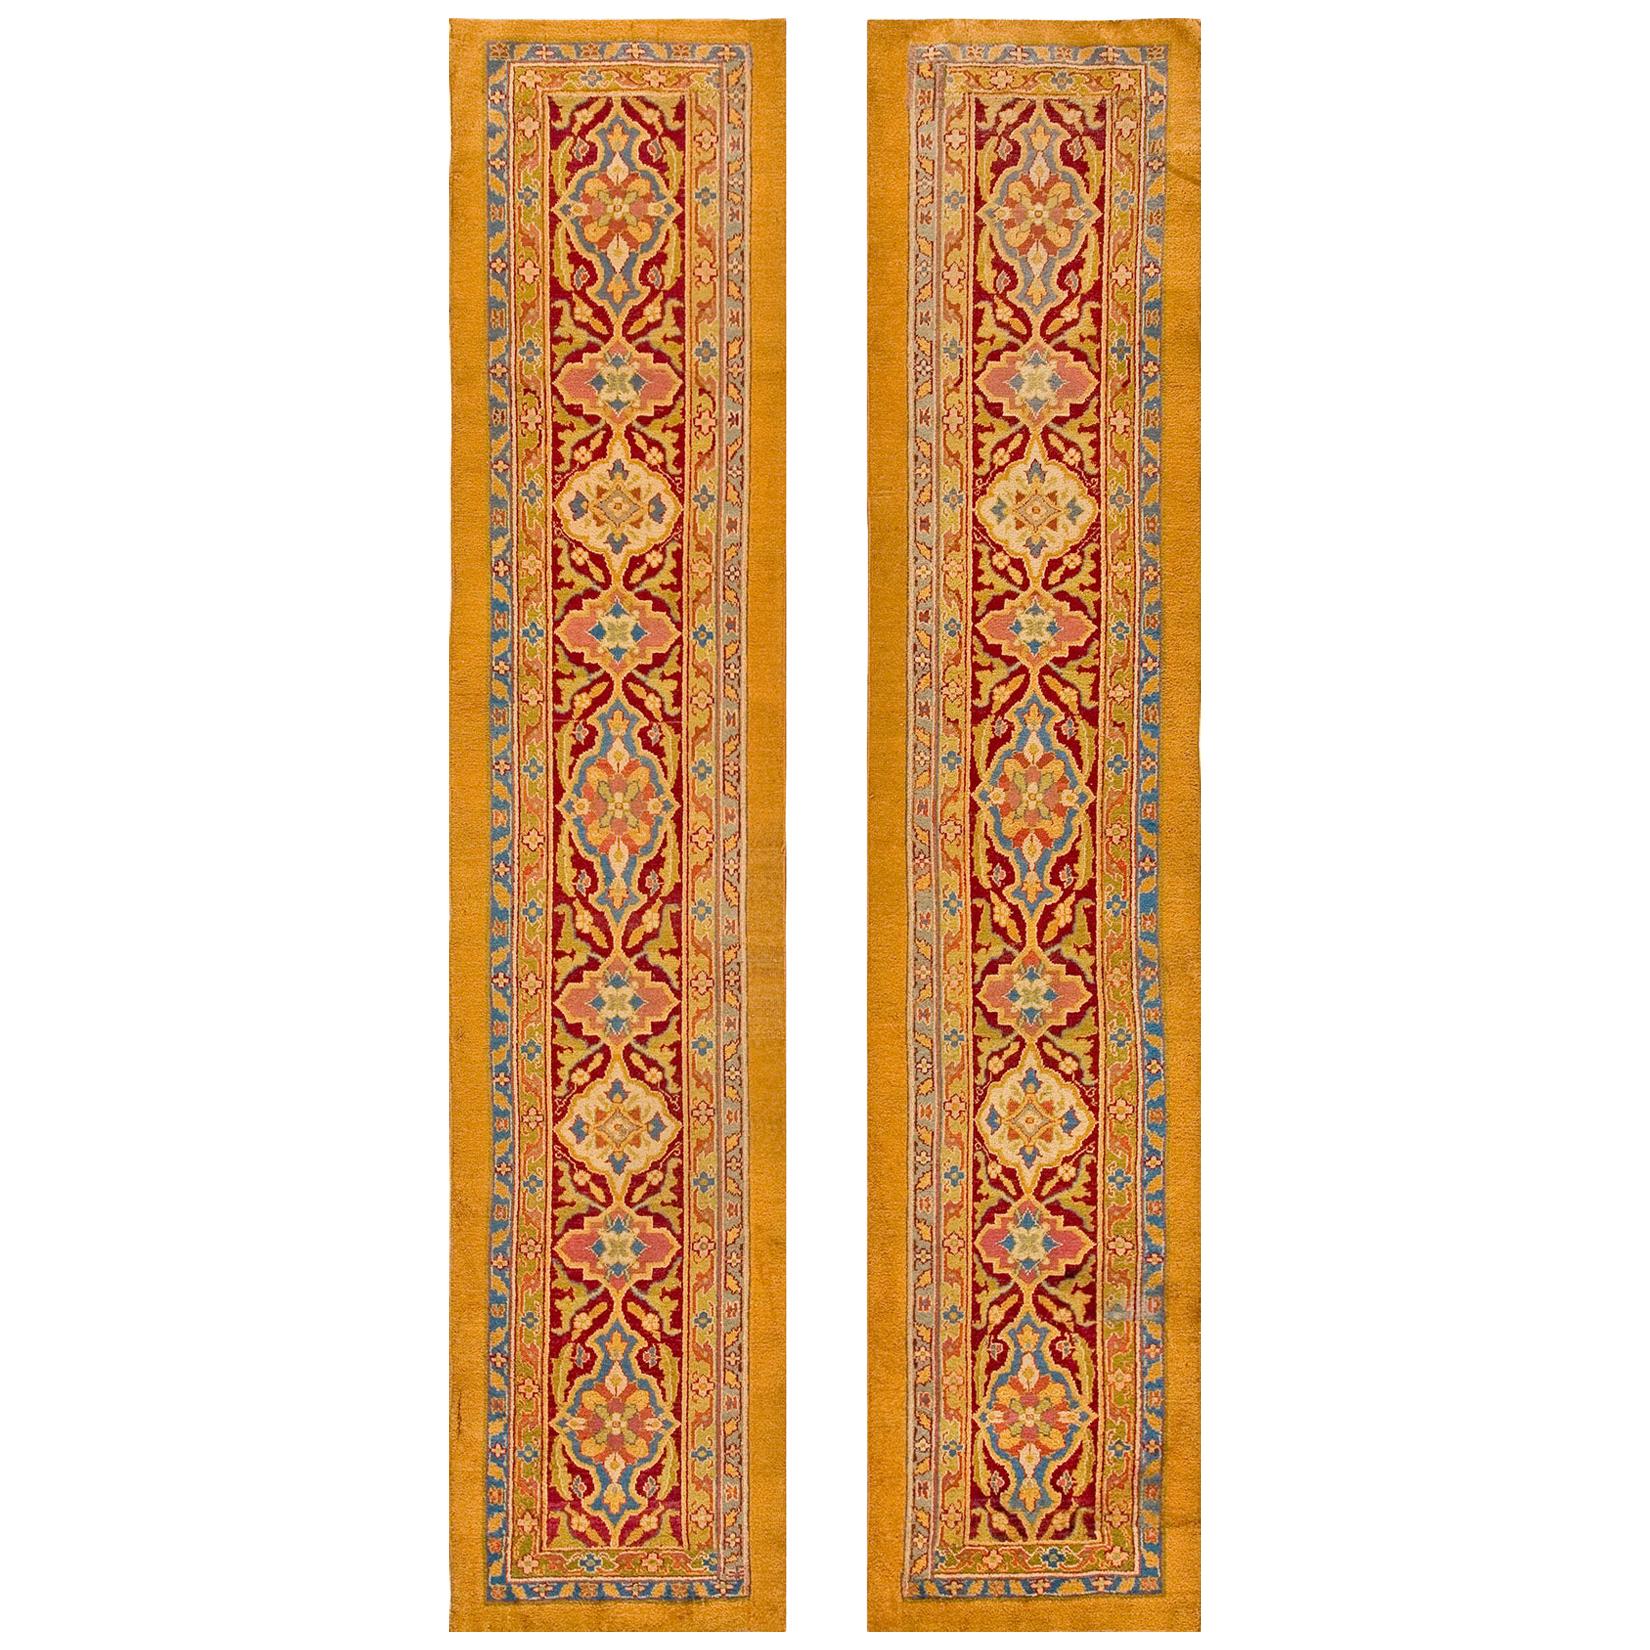 Early 20th Century Pair of N. Indian Agra Carpets ( 2'6" x 12' - 76 x 366 )  For Sale